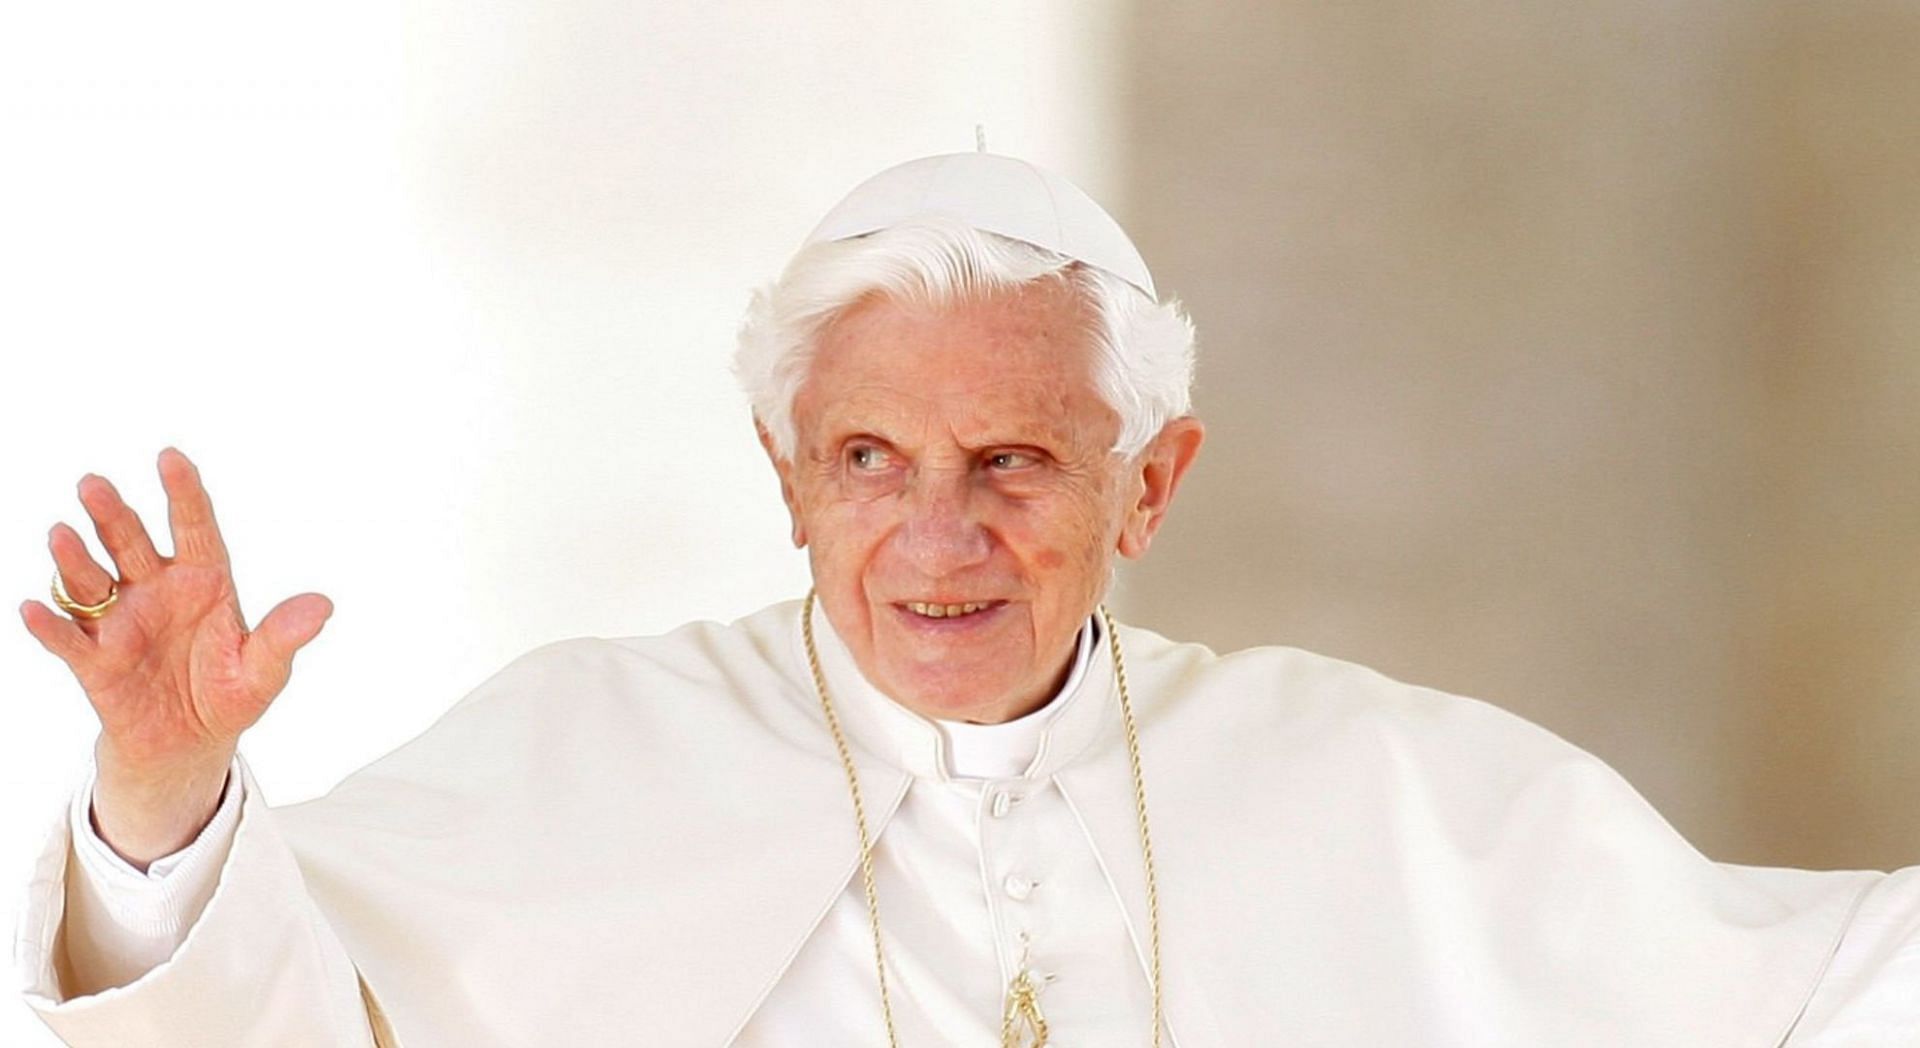 Pope Benedict left the Catholic community after stepping down from his role in 2013 (Image via Getty Images)